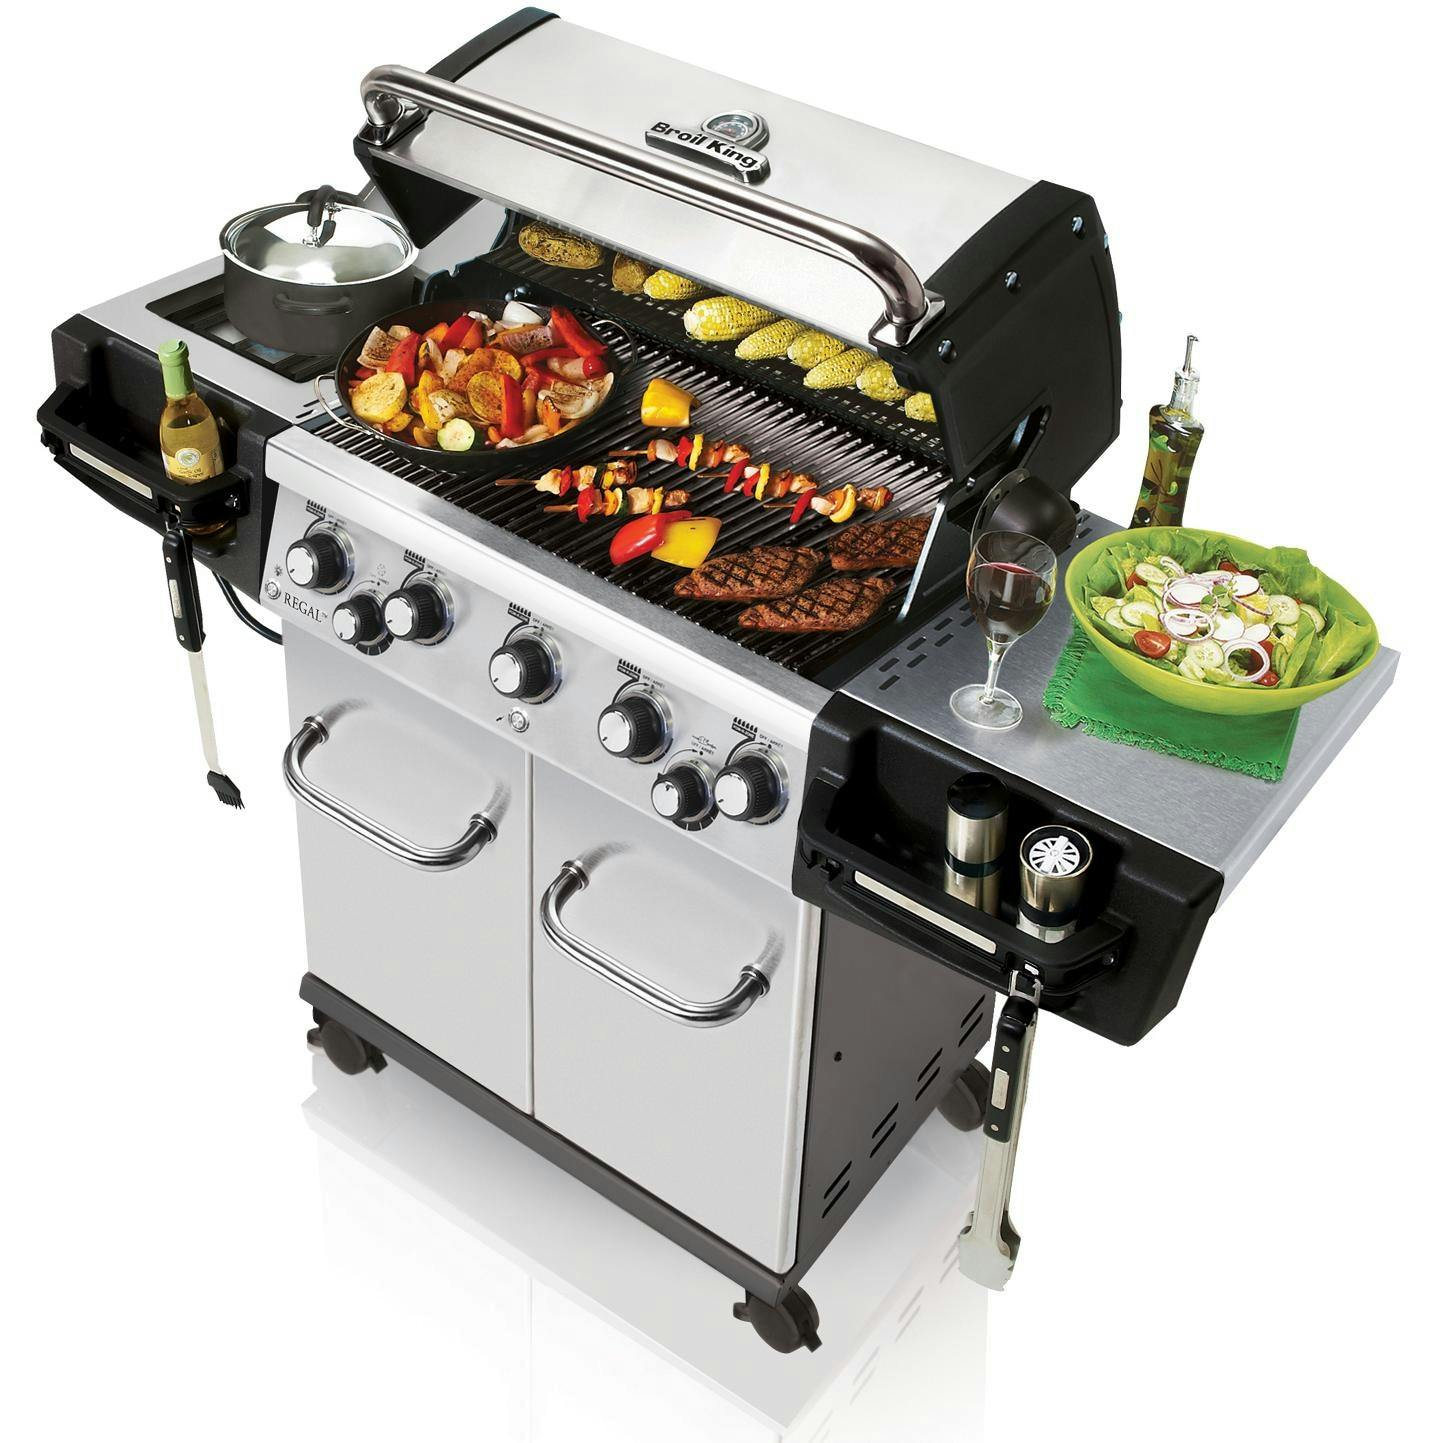 Broil King Regal Pro S590 Gas Grill